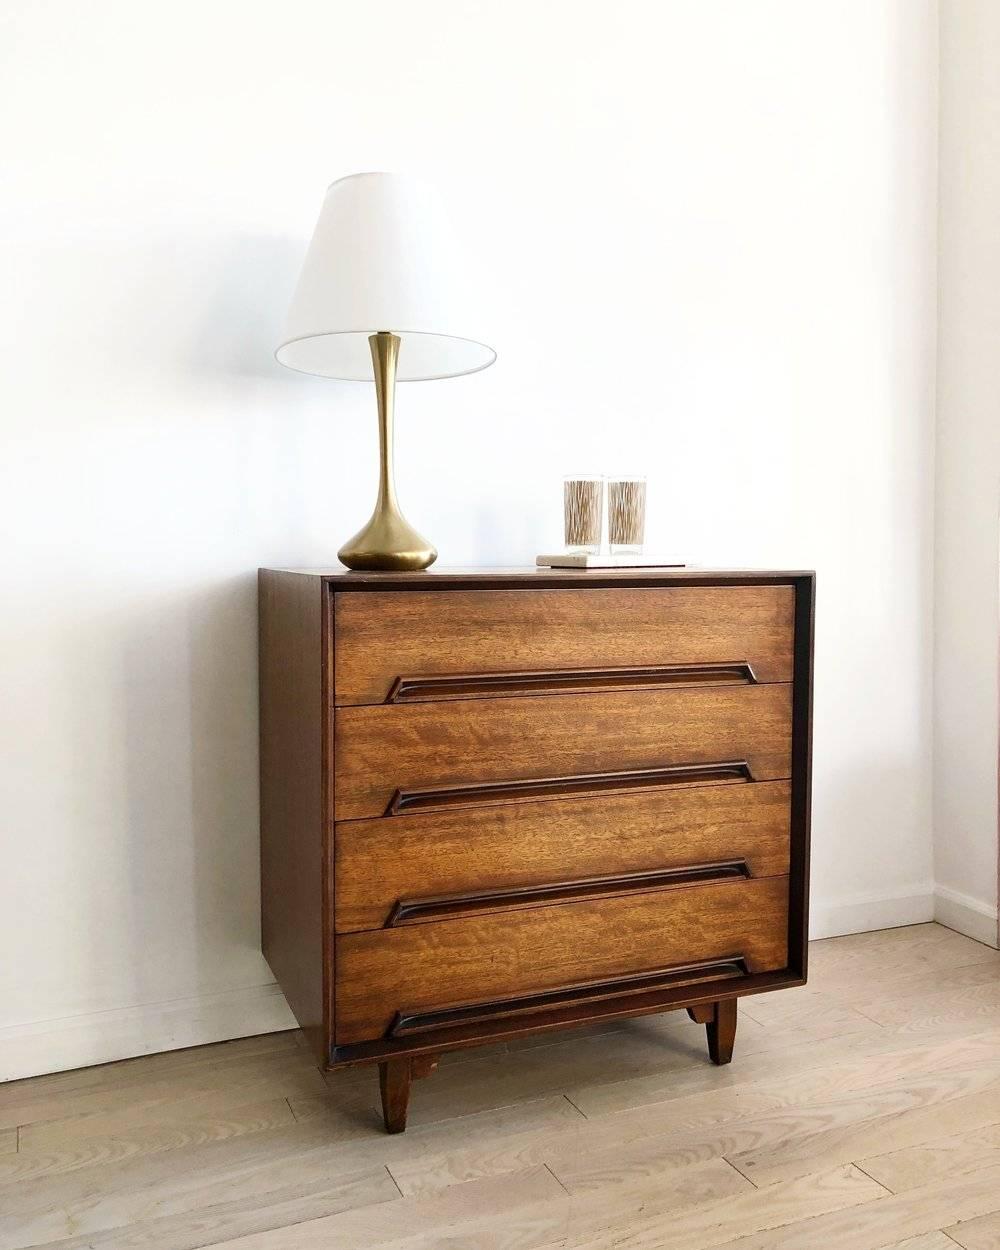 Mid-20th Century Early Milo Baughman for Drexel Perspective Four-Drawer Chest of Drawers